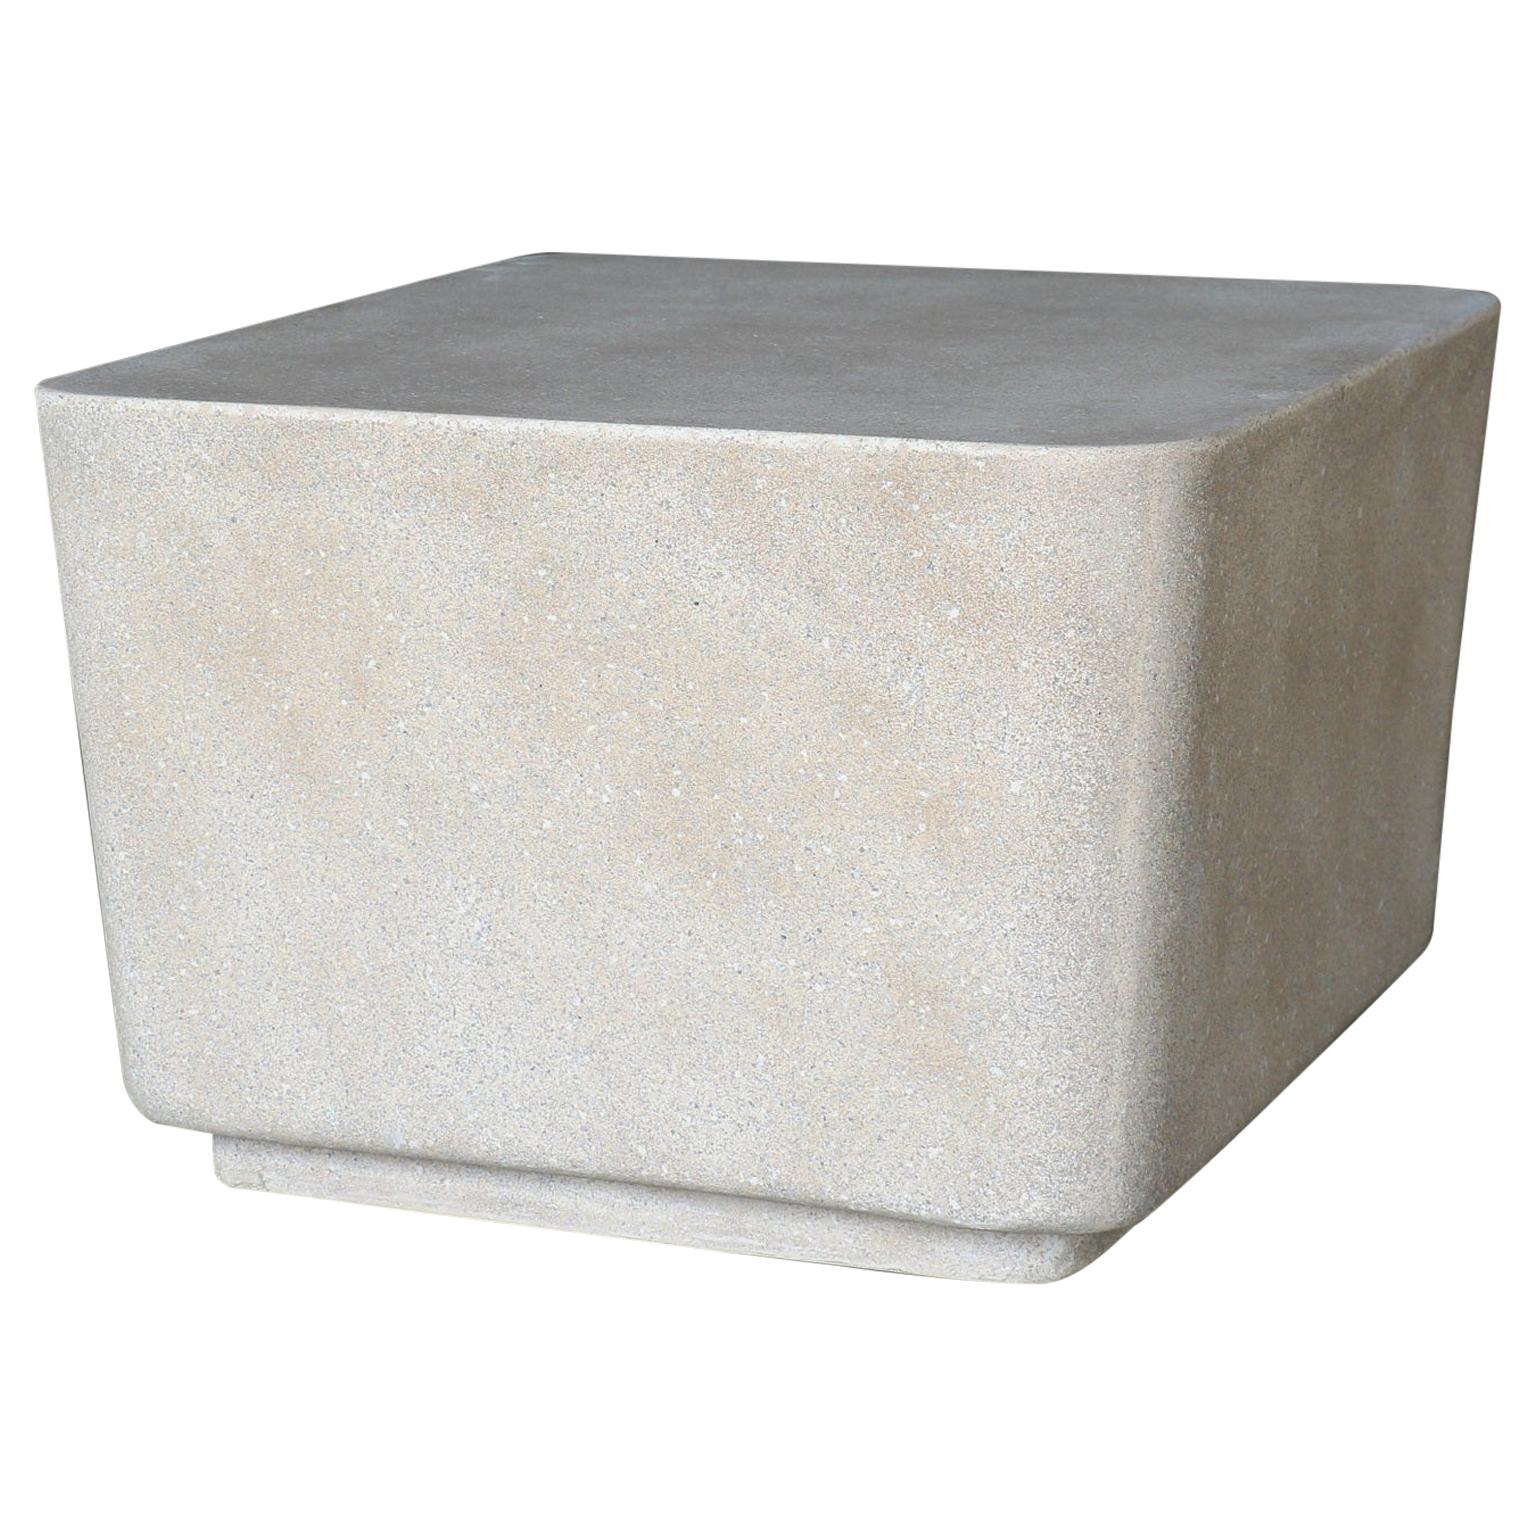 Cast Resin 'Block' Cocktail Table, Aged Stone Finish by Zachary A. Design